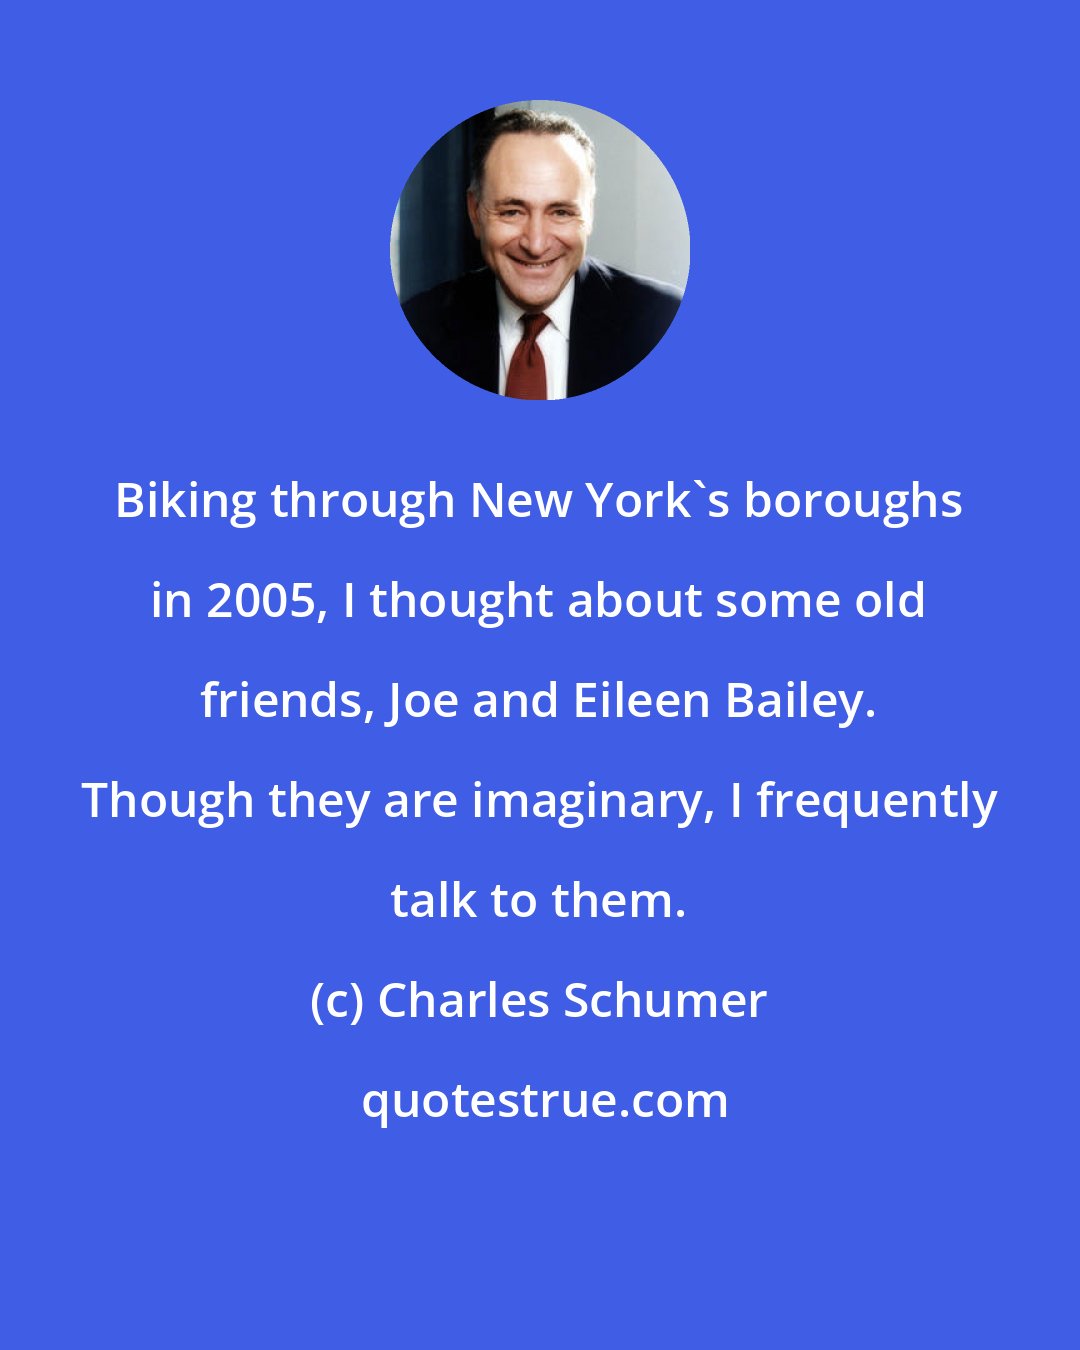 Charles Schumer: Biking through New York's boroughs in 2005, I thought about some old friends, Joe and Eileen Bailey. Though they are imaginary, I frequently talk to them.